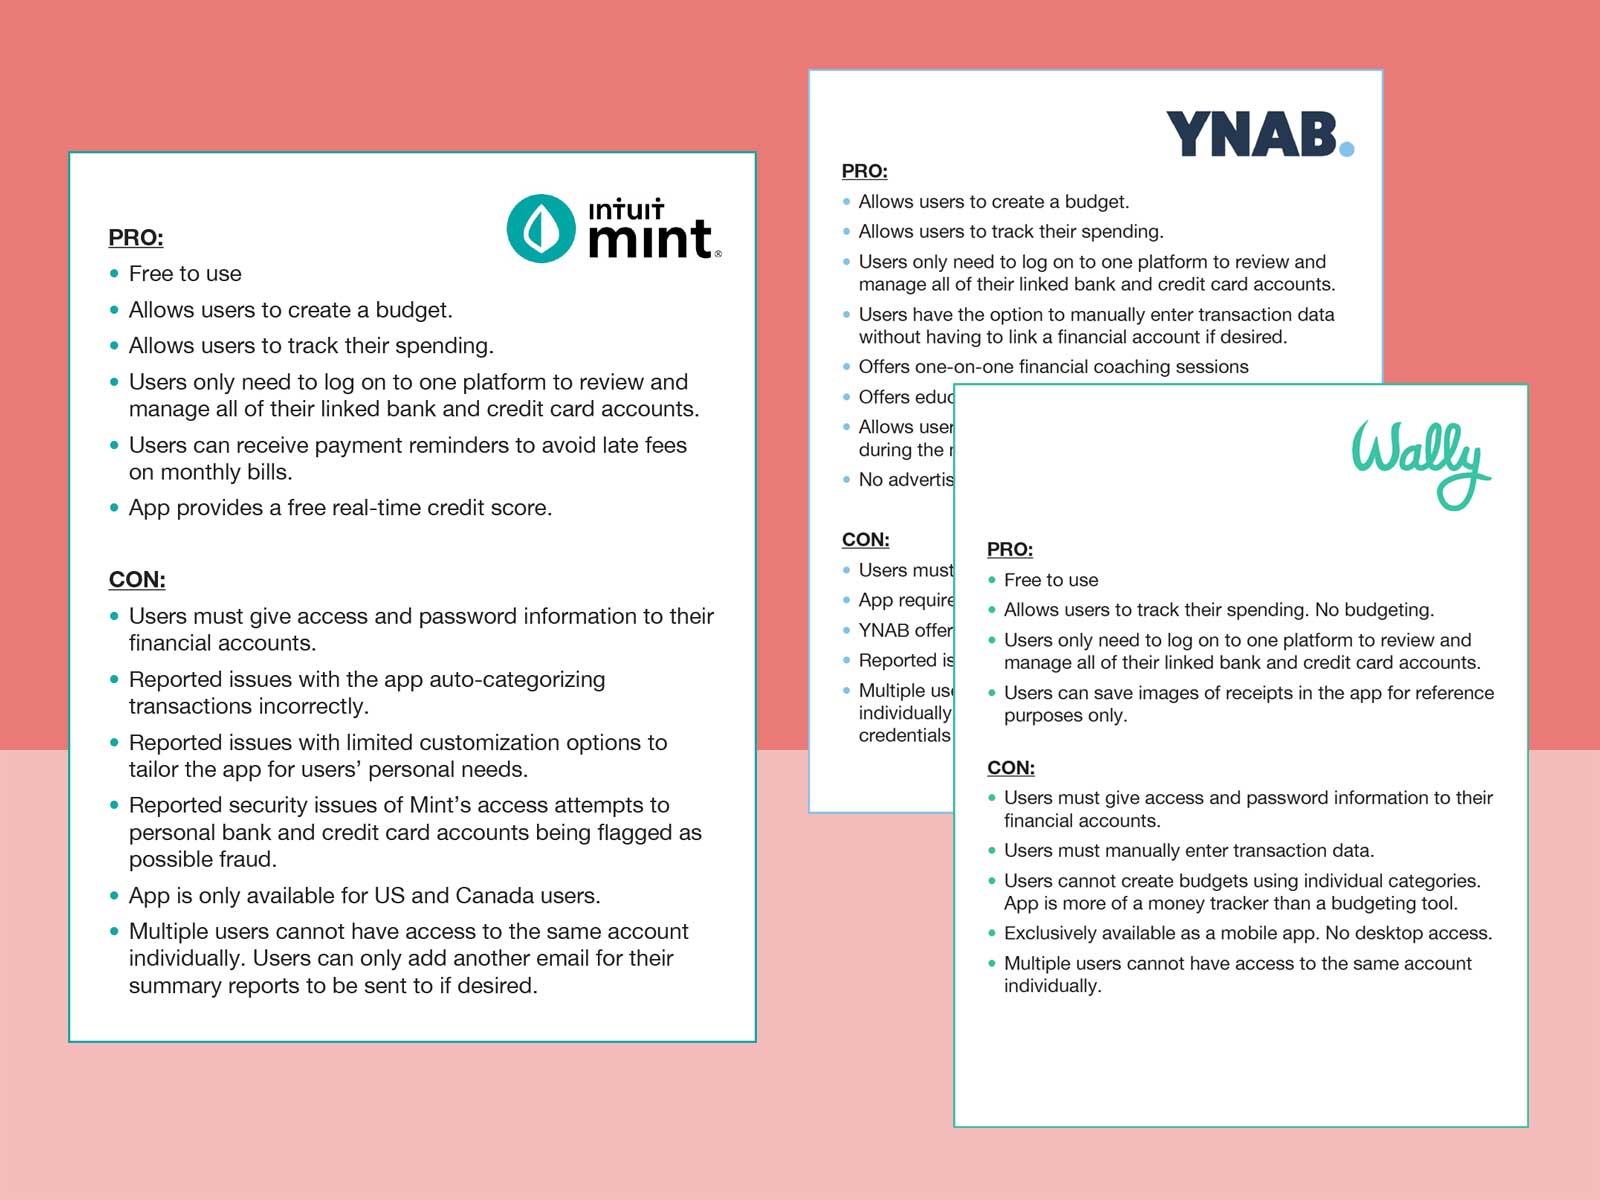 Pros and cons from competitor analysis of Mint, YNAB, and Wally